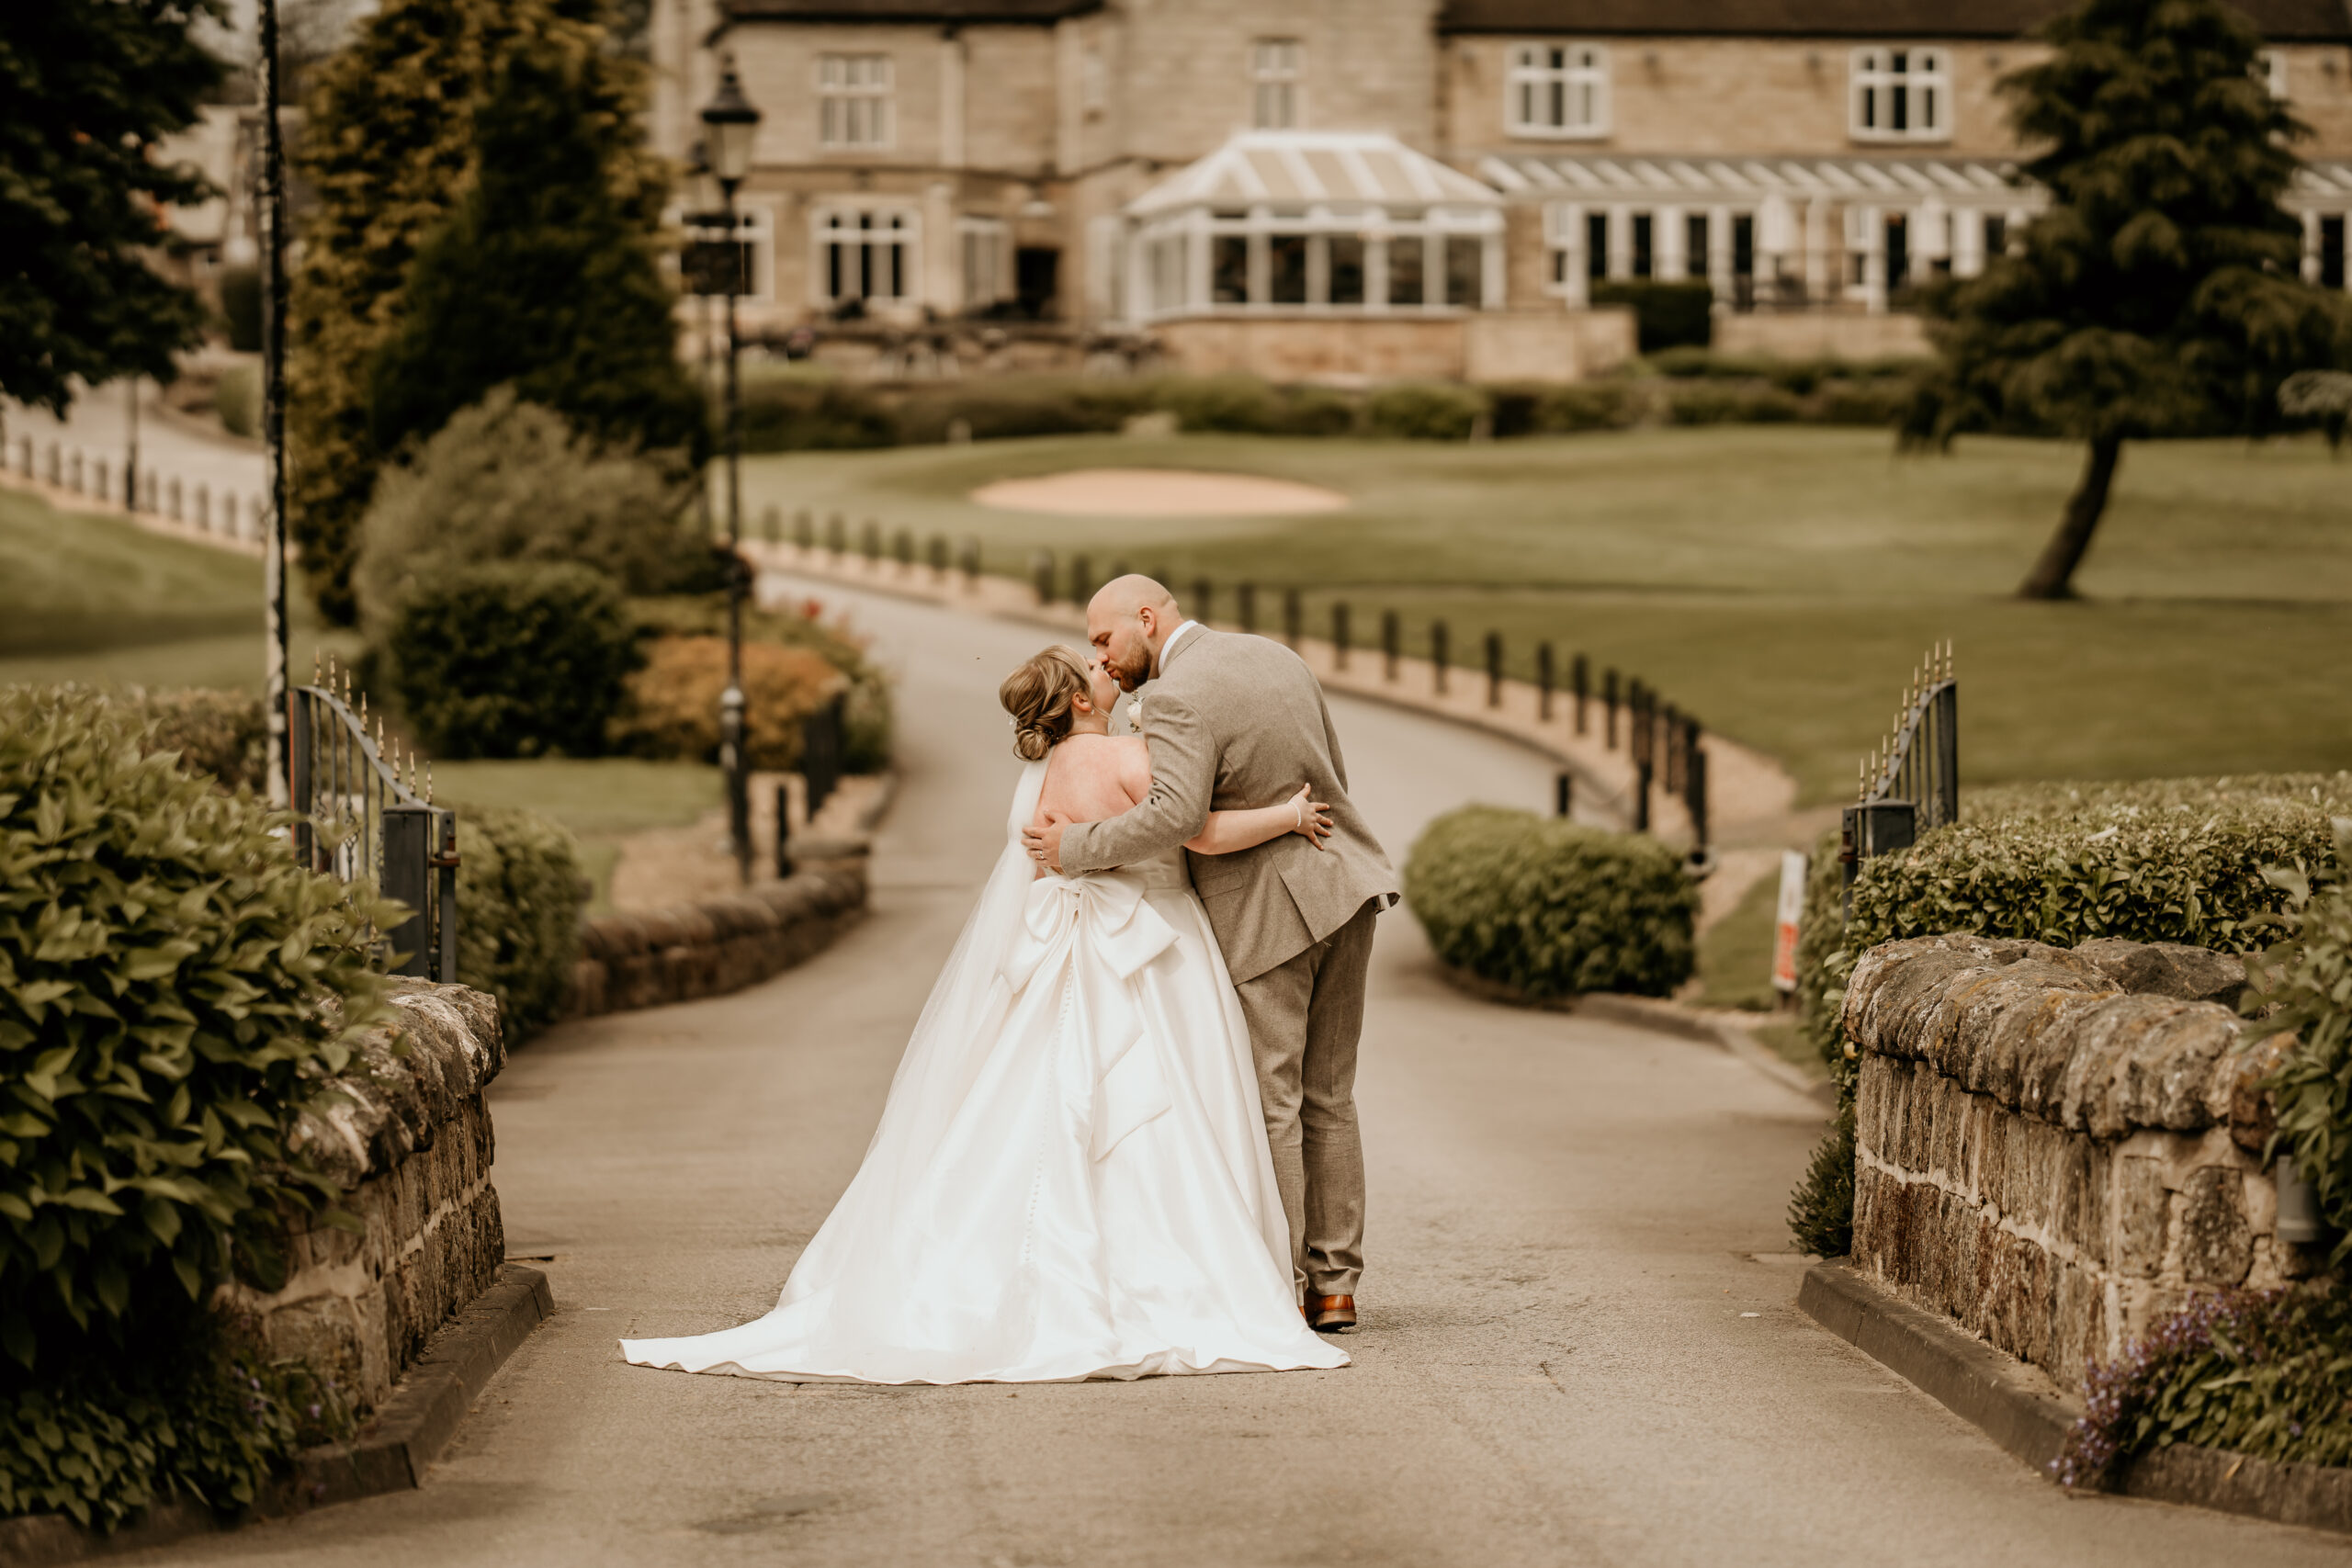 Summer wedding at Horsely Lodge near Derby